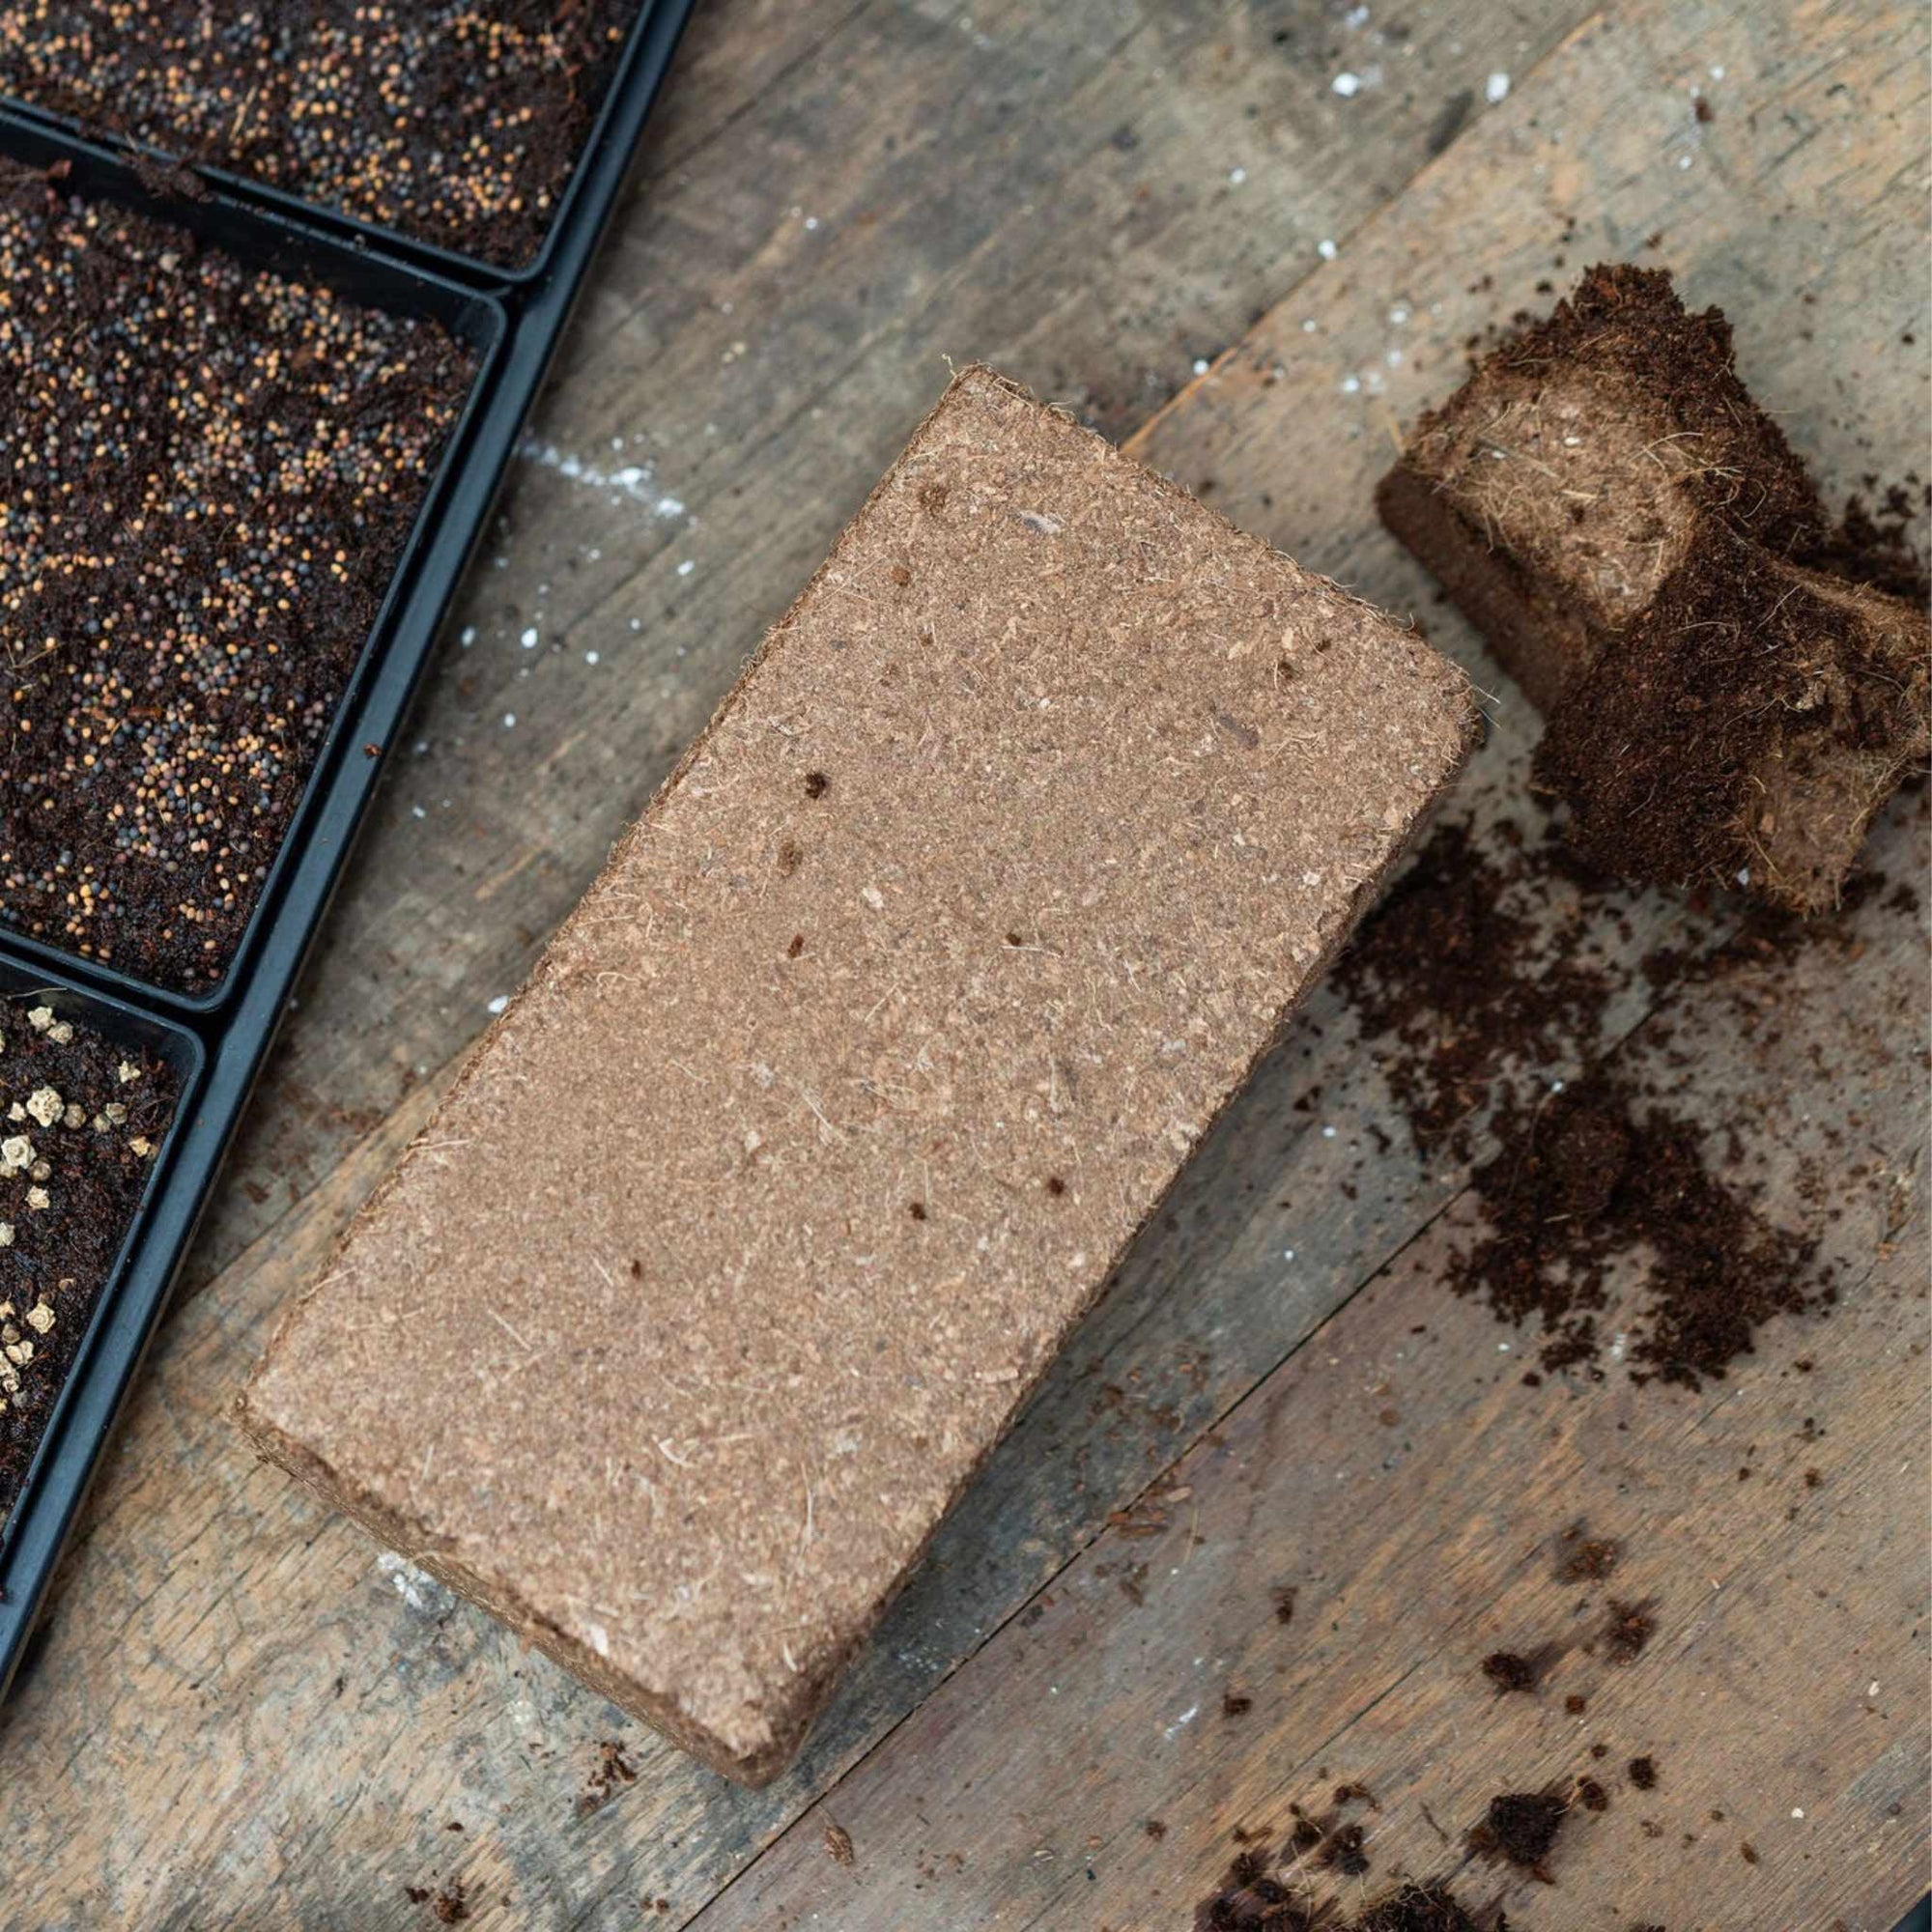 Coco coir brick off center to tray of 5 x 5's filled with prepared coco coir and planted with microgreen seeds.